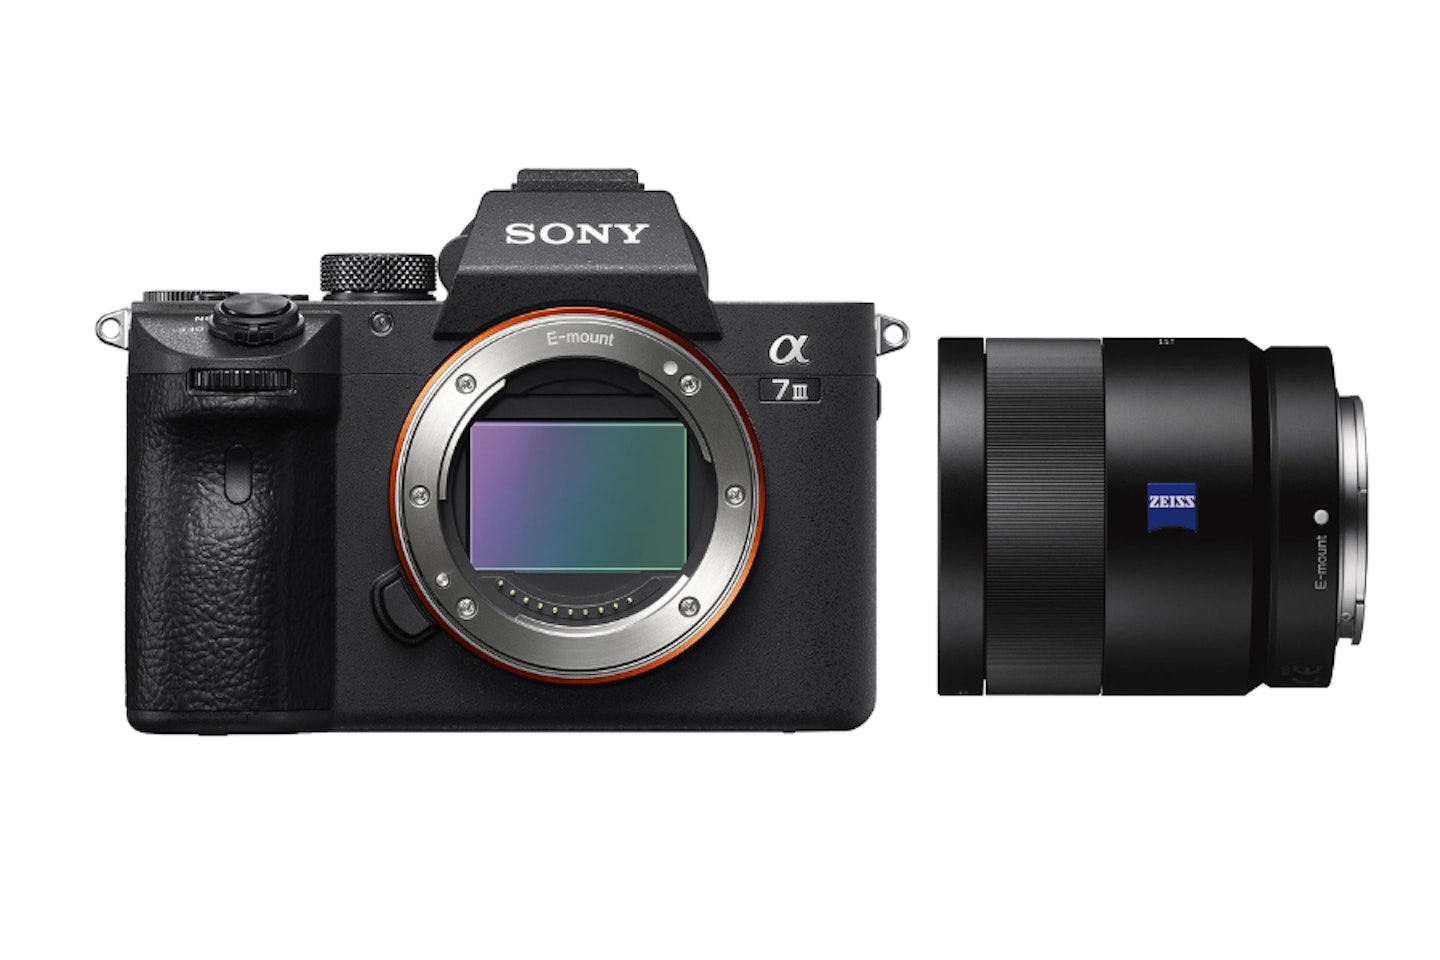 Sony Alpha 7 III - one of the best mirrorless cameras